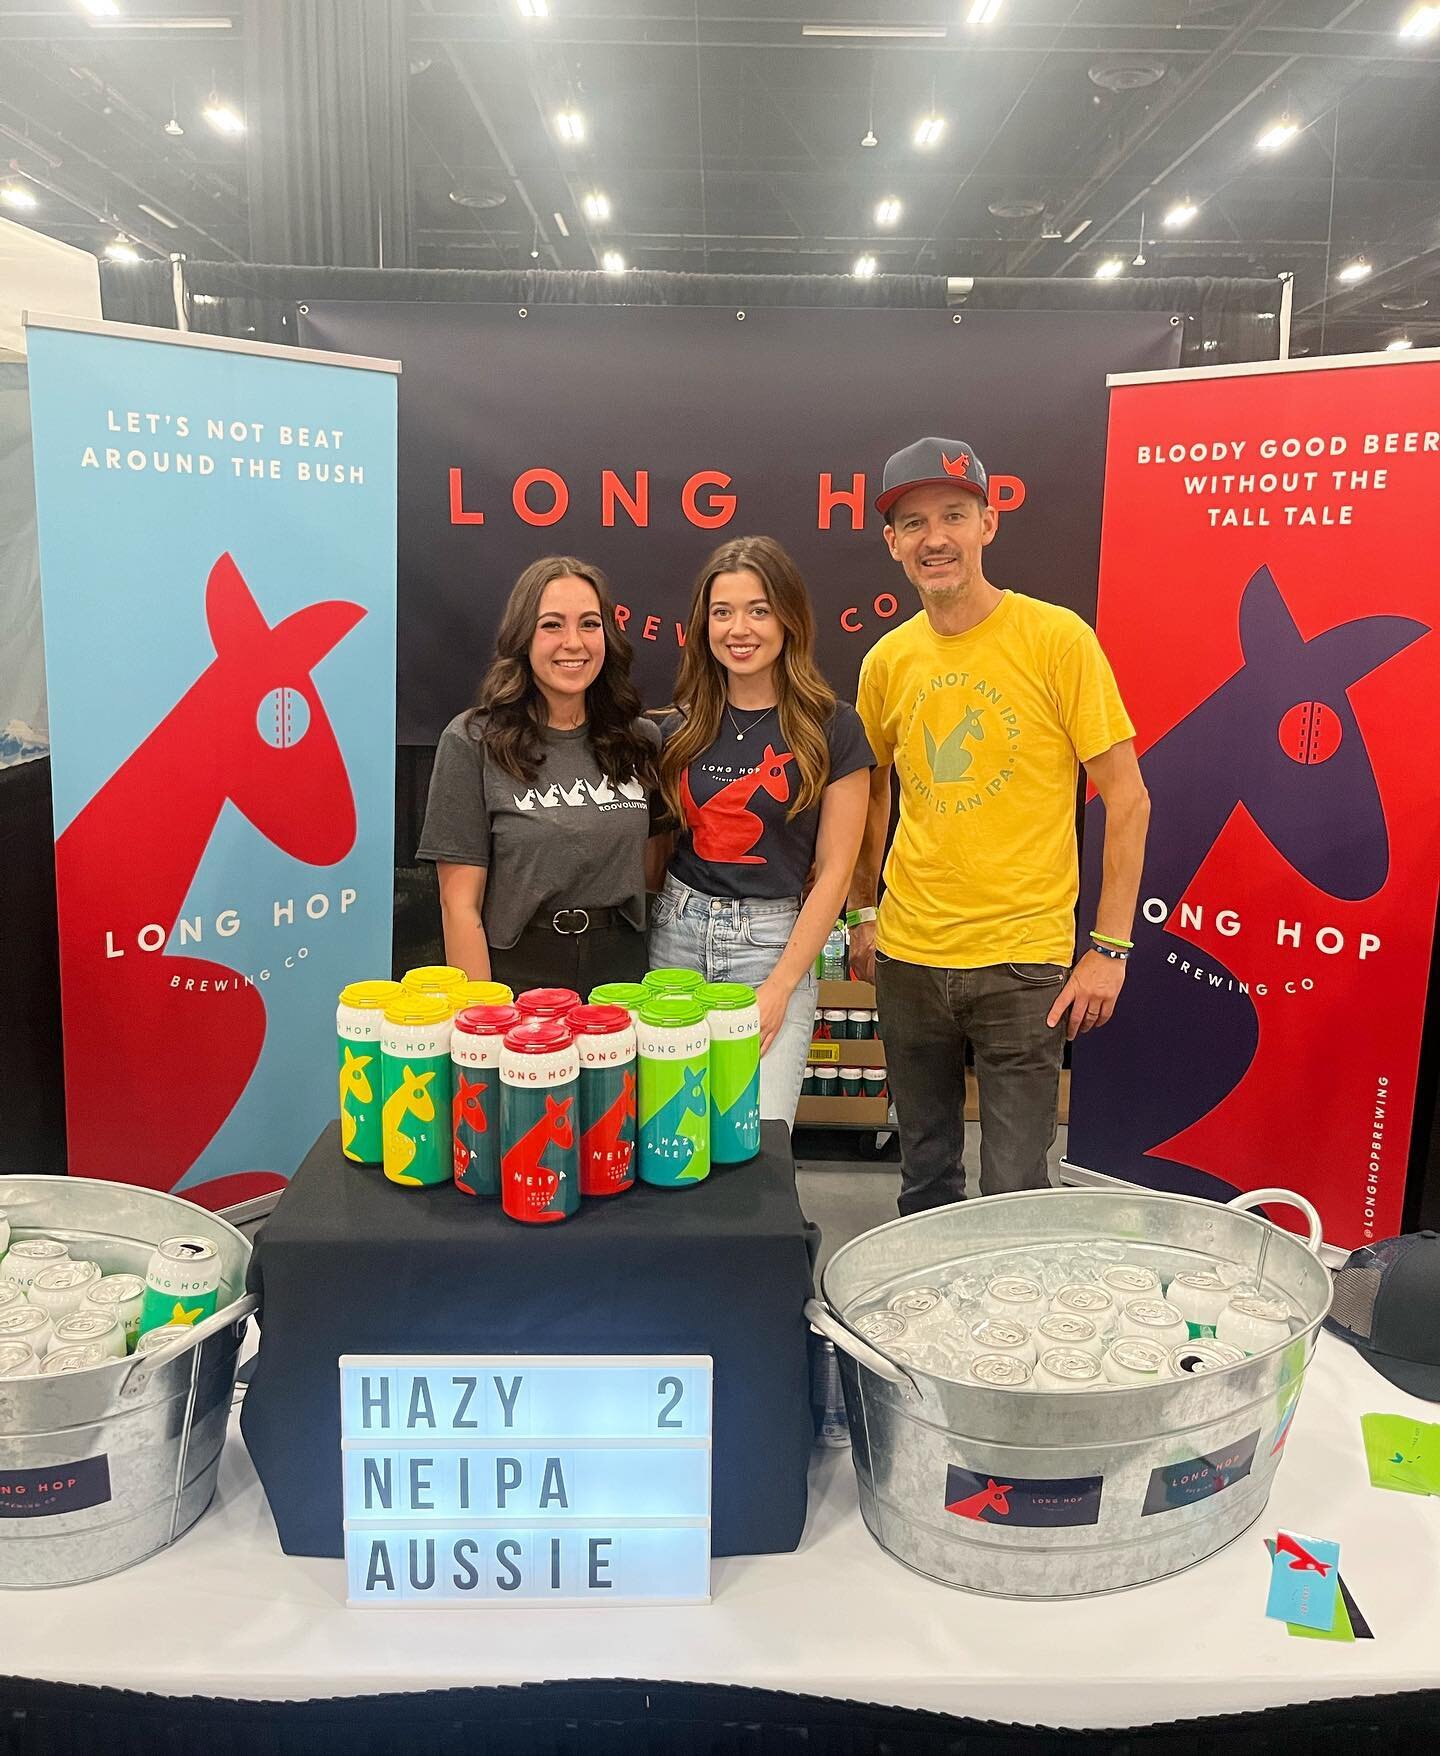 A rare sighting of Jared at @abbeerfestivals day 2! Come visit us to try our new Aussie Ale 🍺